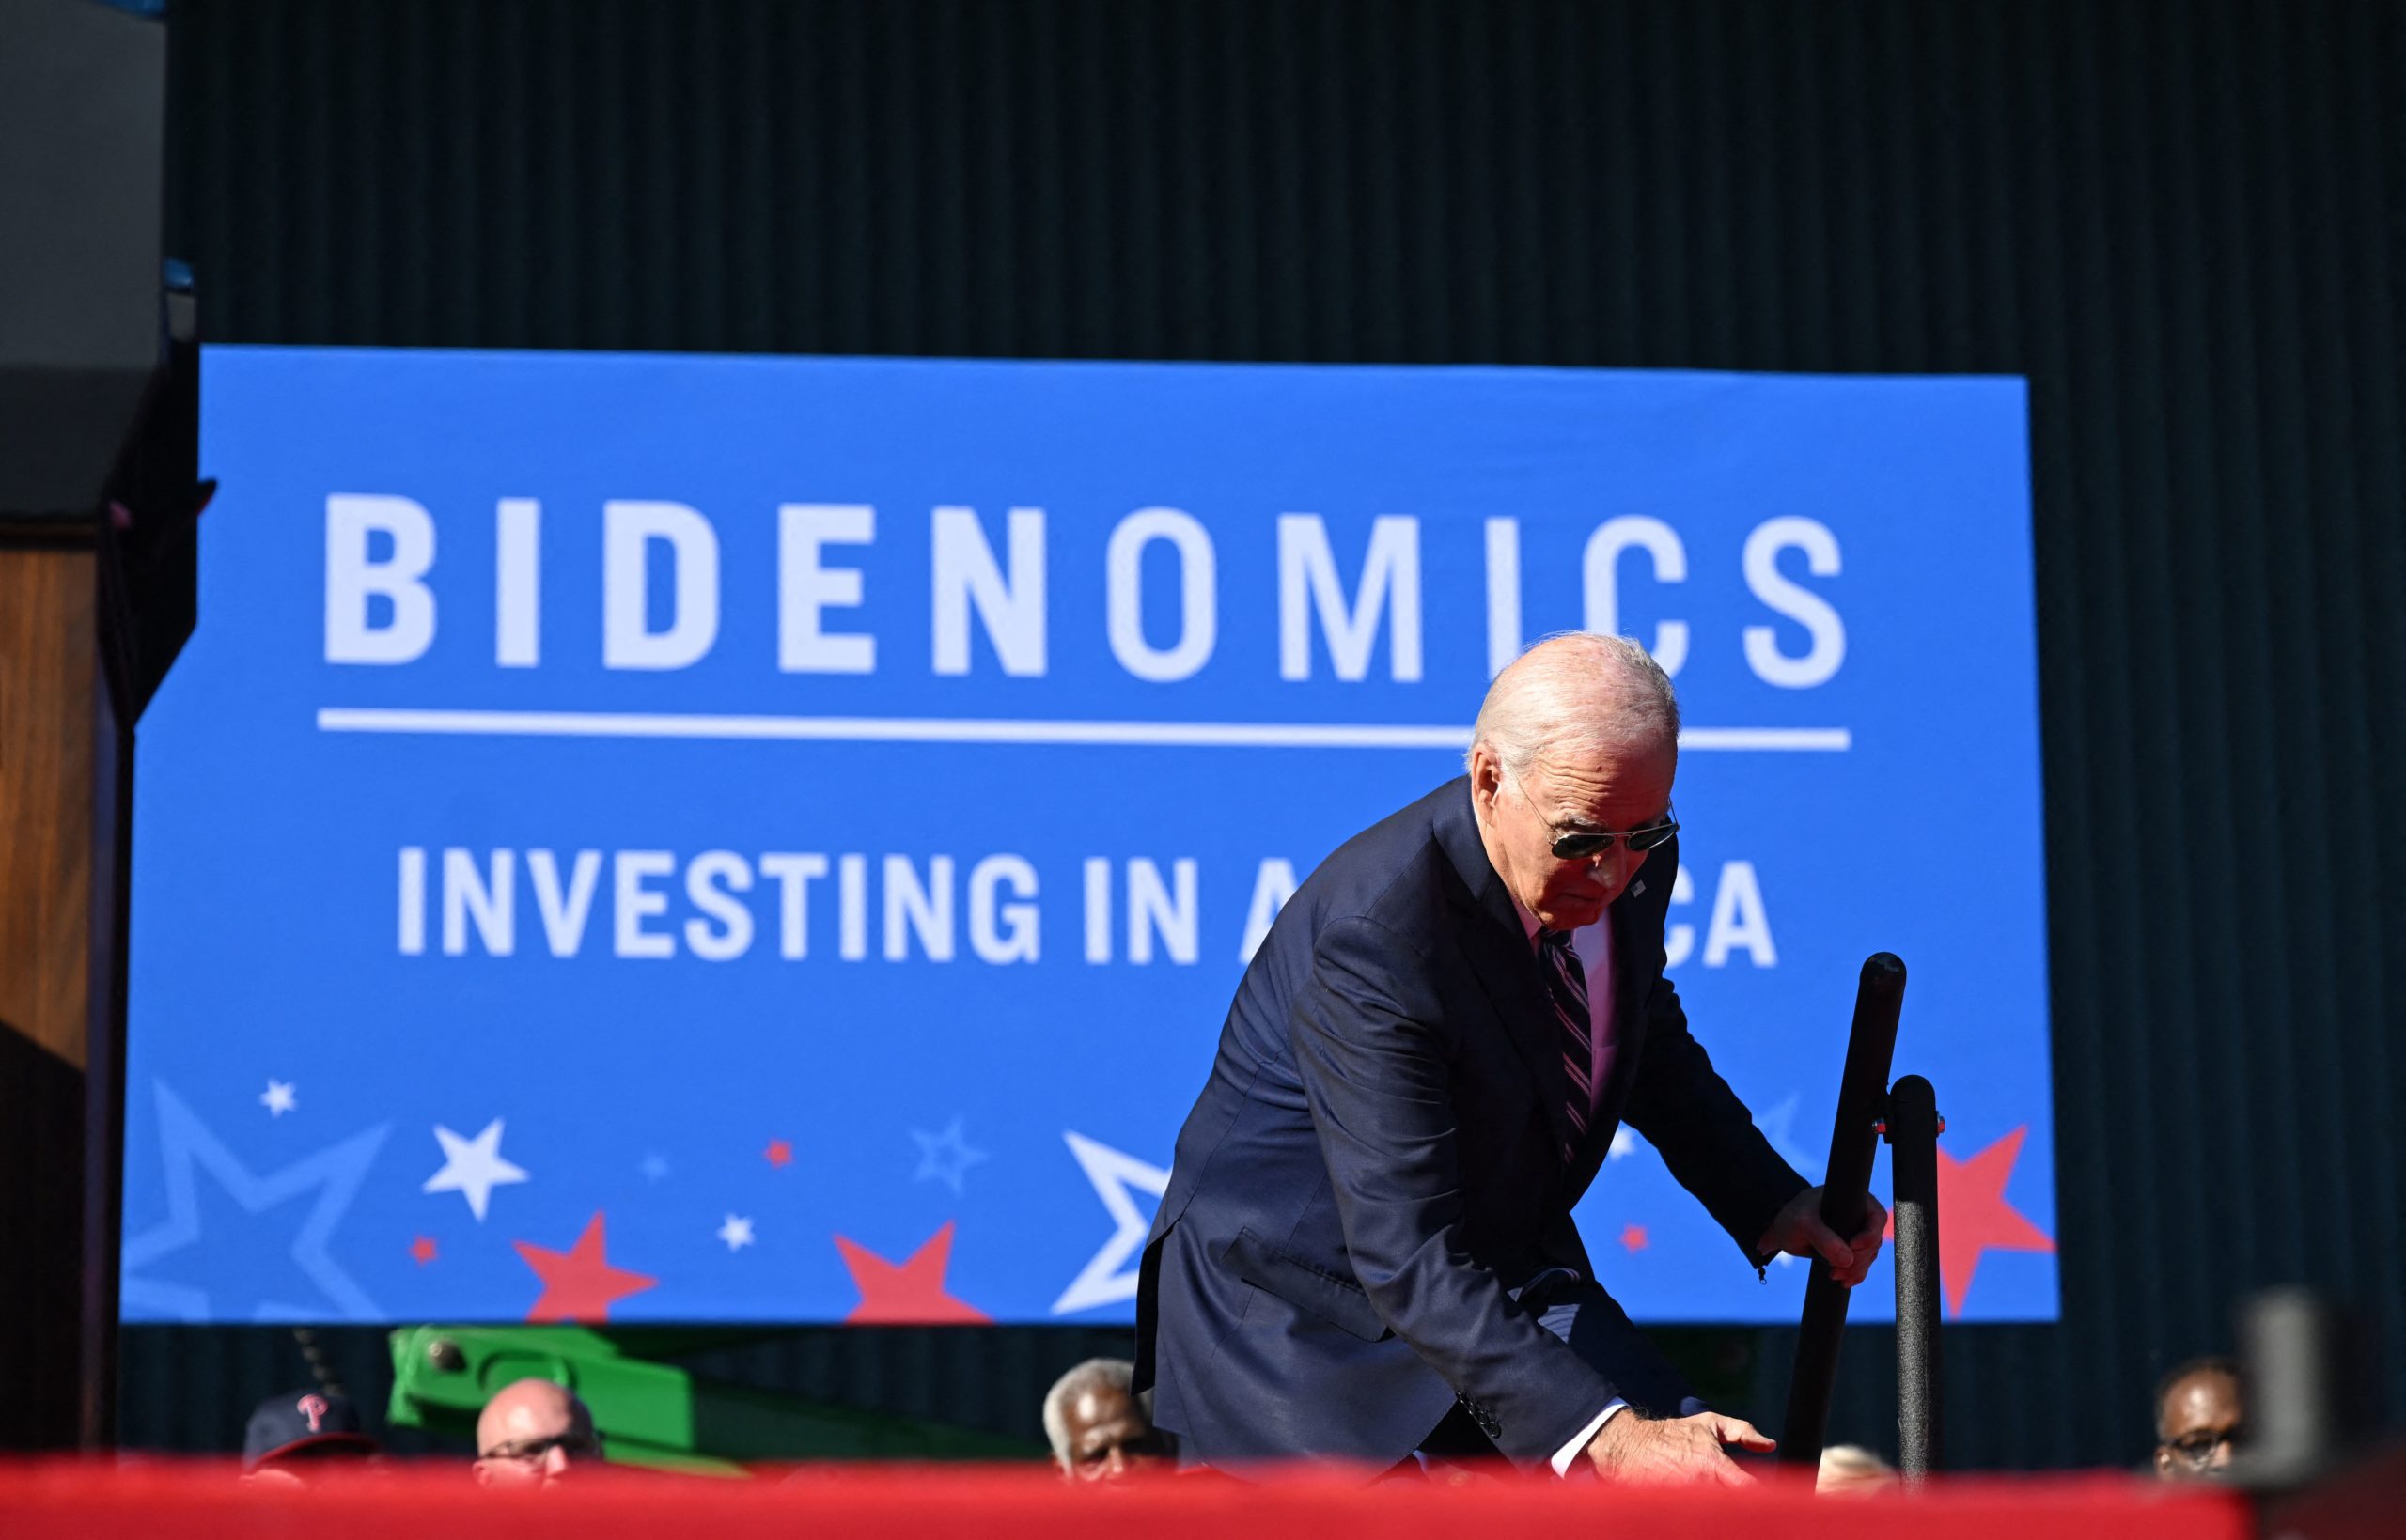  US President Joe Biden trips on the steps as he arrives on stage to speak about his Bidenomics agenda at Tioga Marine Terminal in Philadelphia, Pennsylvania, on October 13, 2023. (Photo by ANDREW CABALLERO-REYNOLDS / AFP) (Photo by ANDREW CABALLERO-REYNOLDS/AFP via Getty Images)